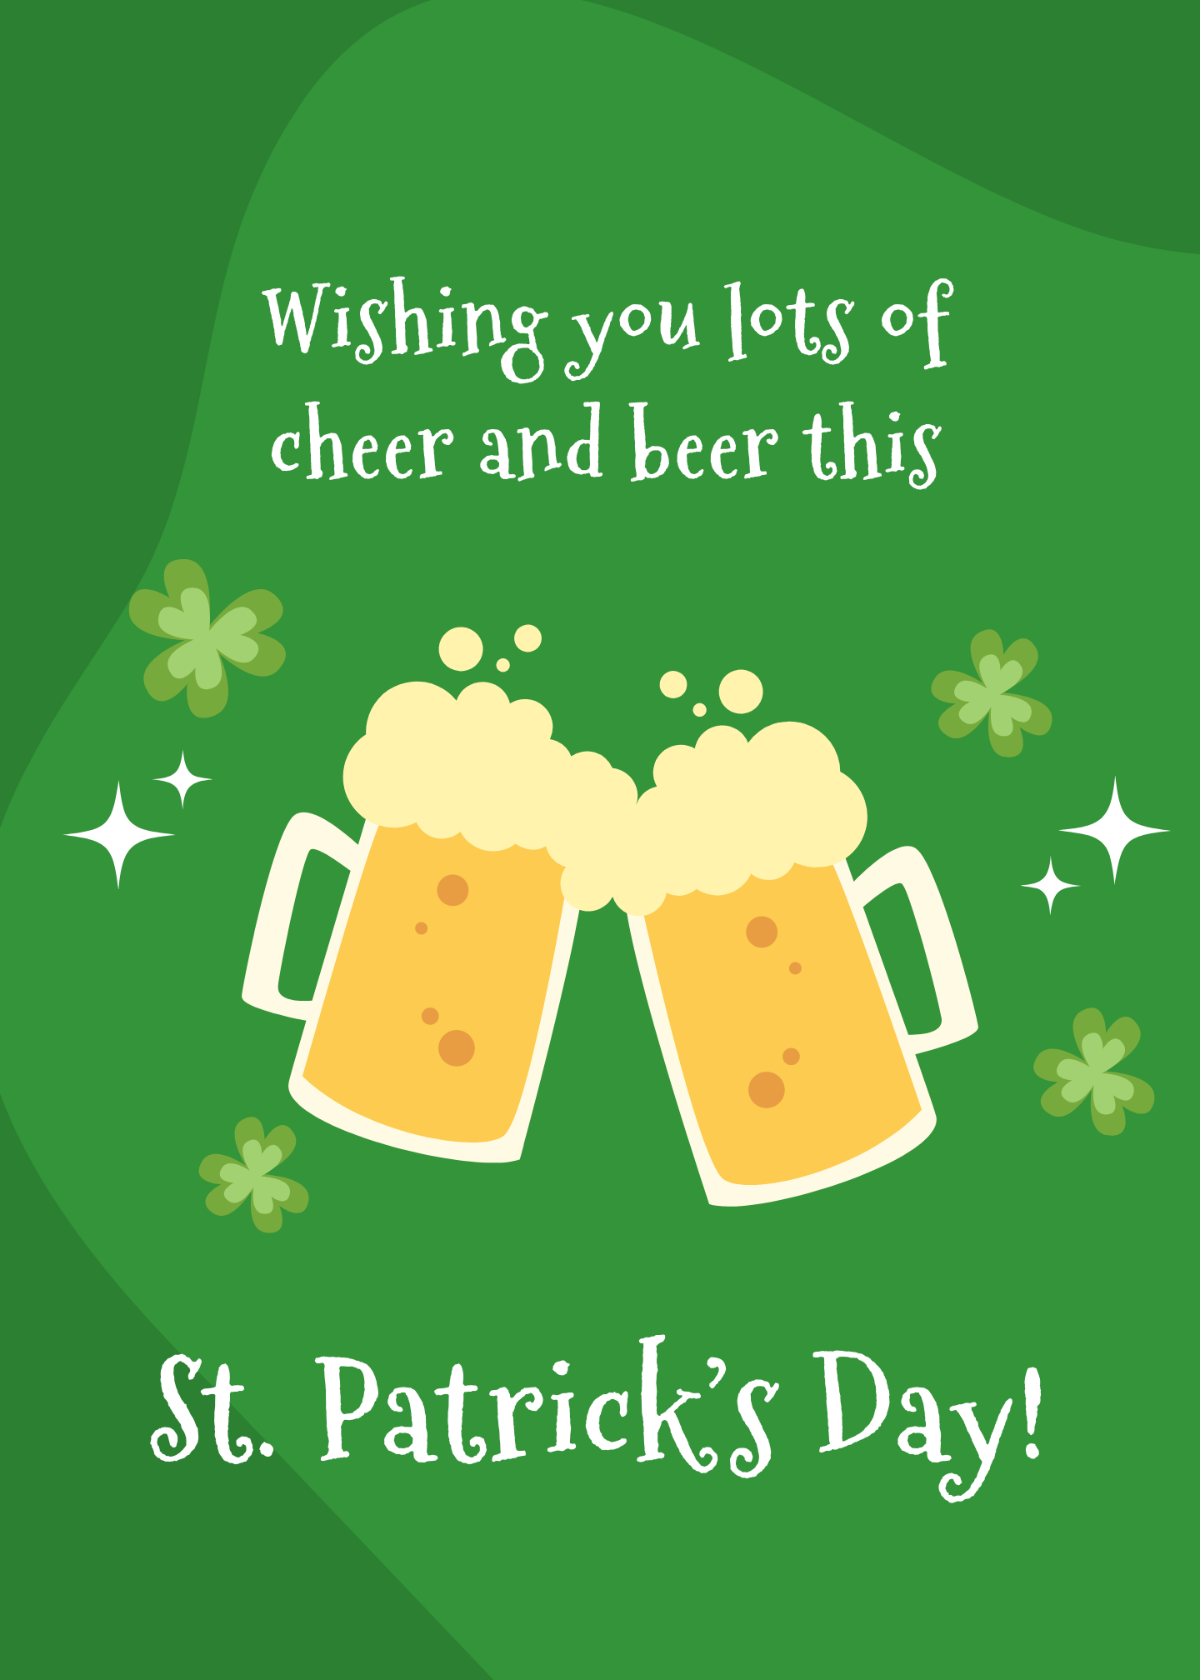 St. Patrick's Day Card Template - Edit Online & Download Example 